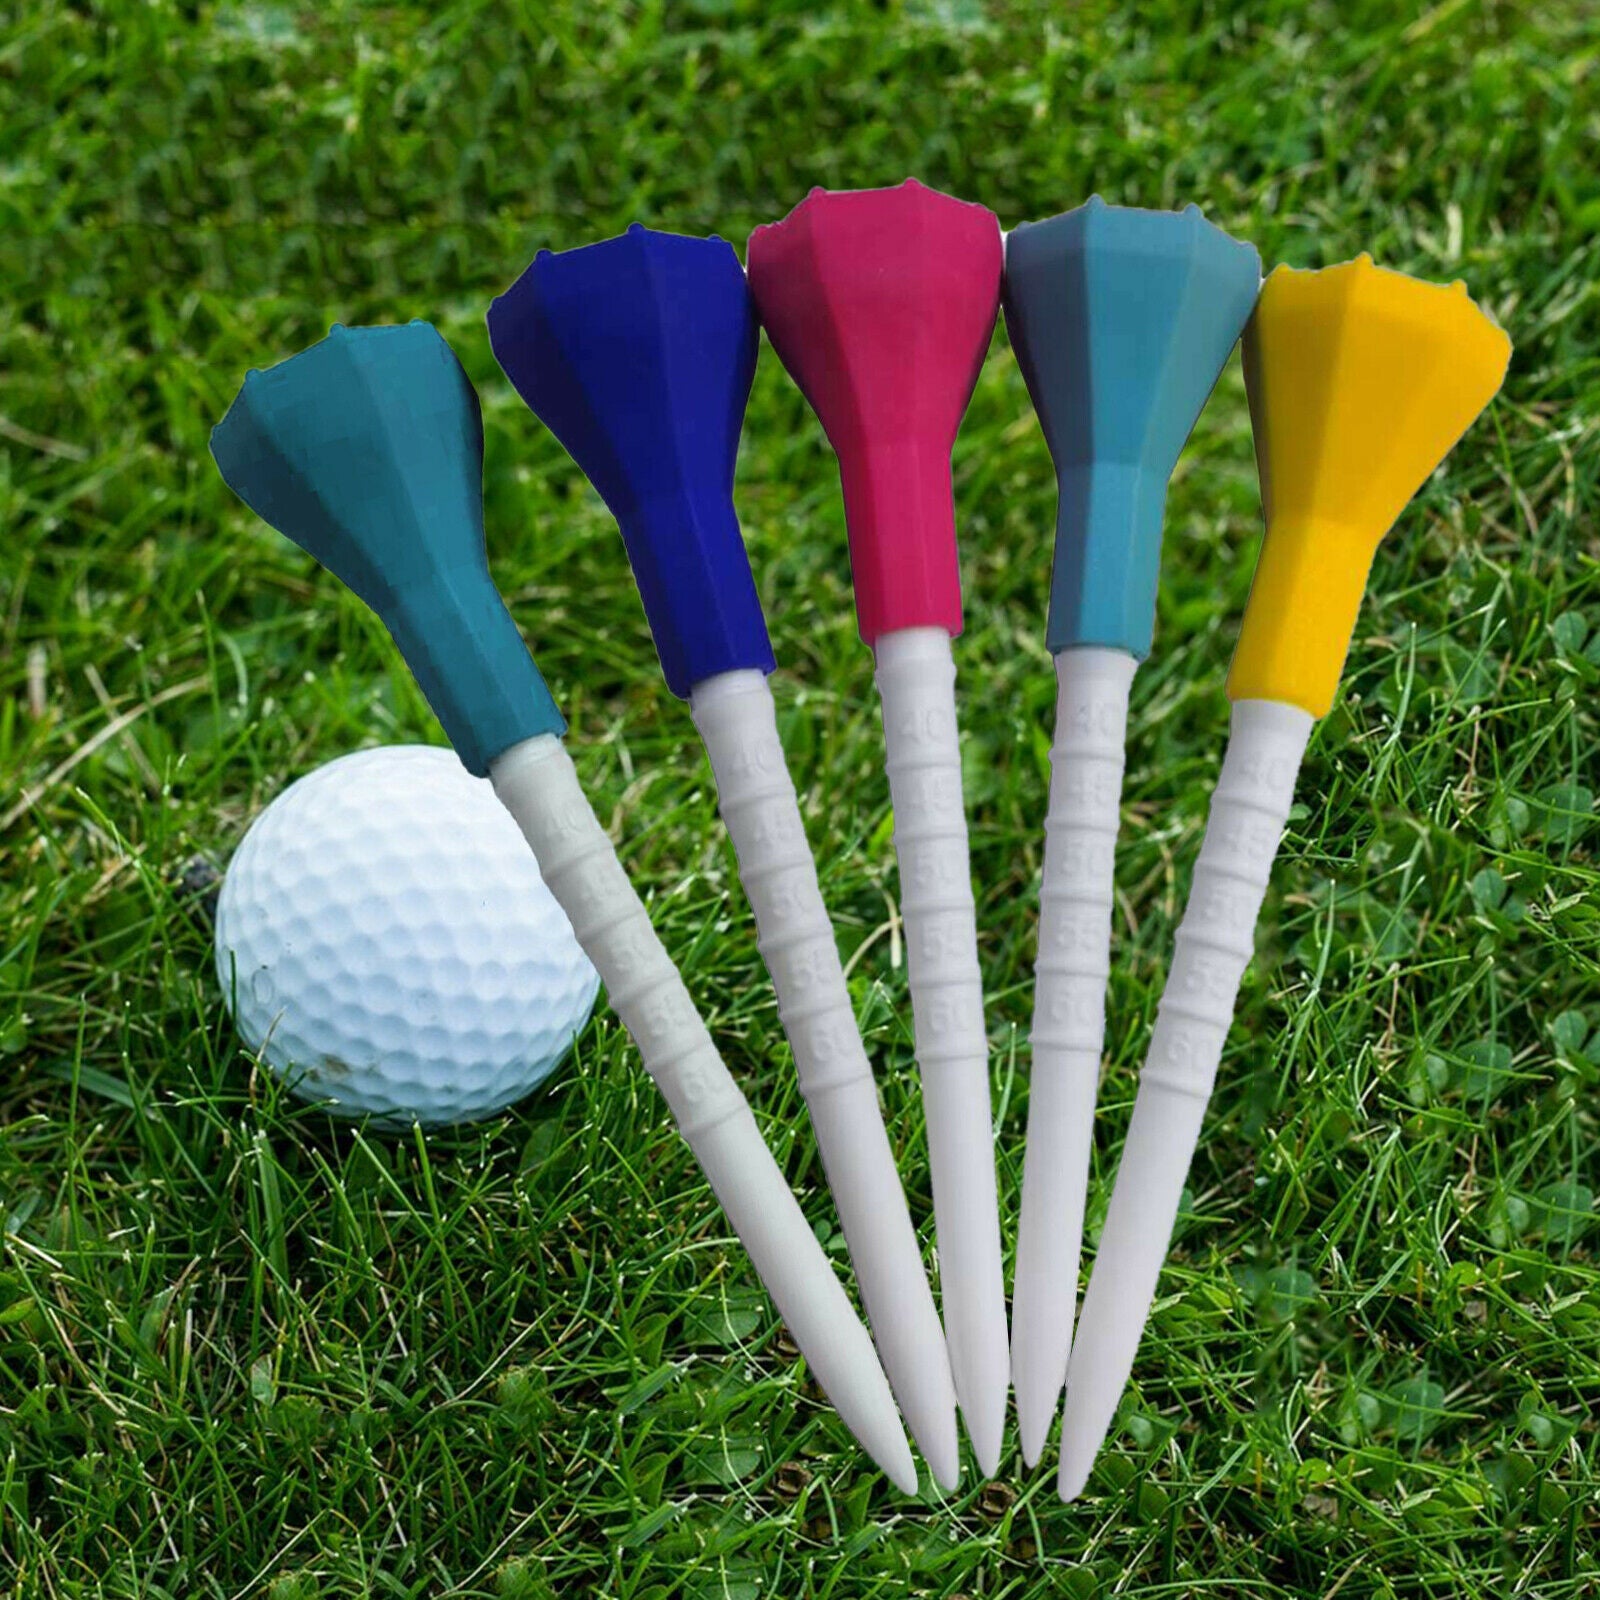 5Pack Plastic Golf Tees Golf Tee Golf Practice Outdoor Sports Accessories